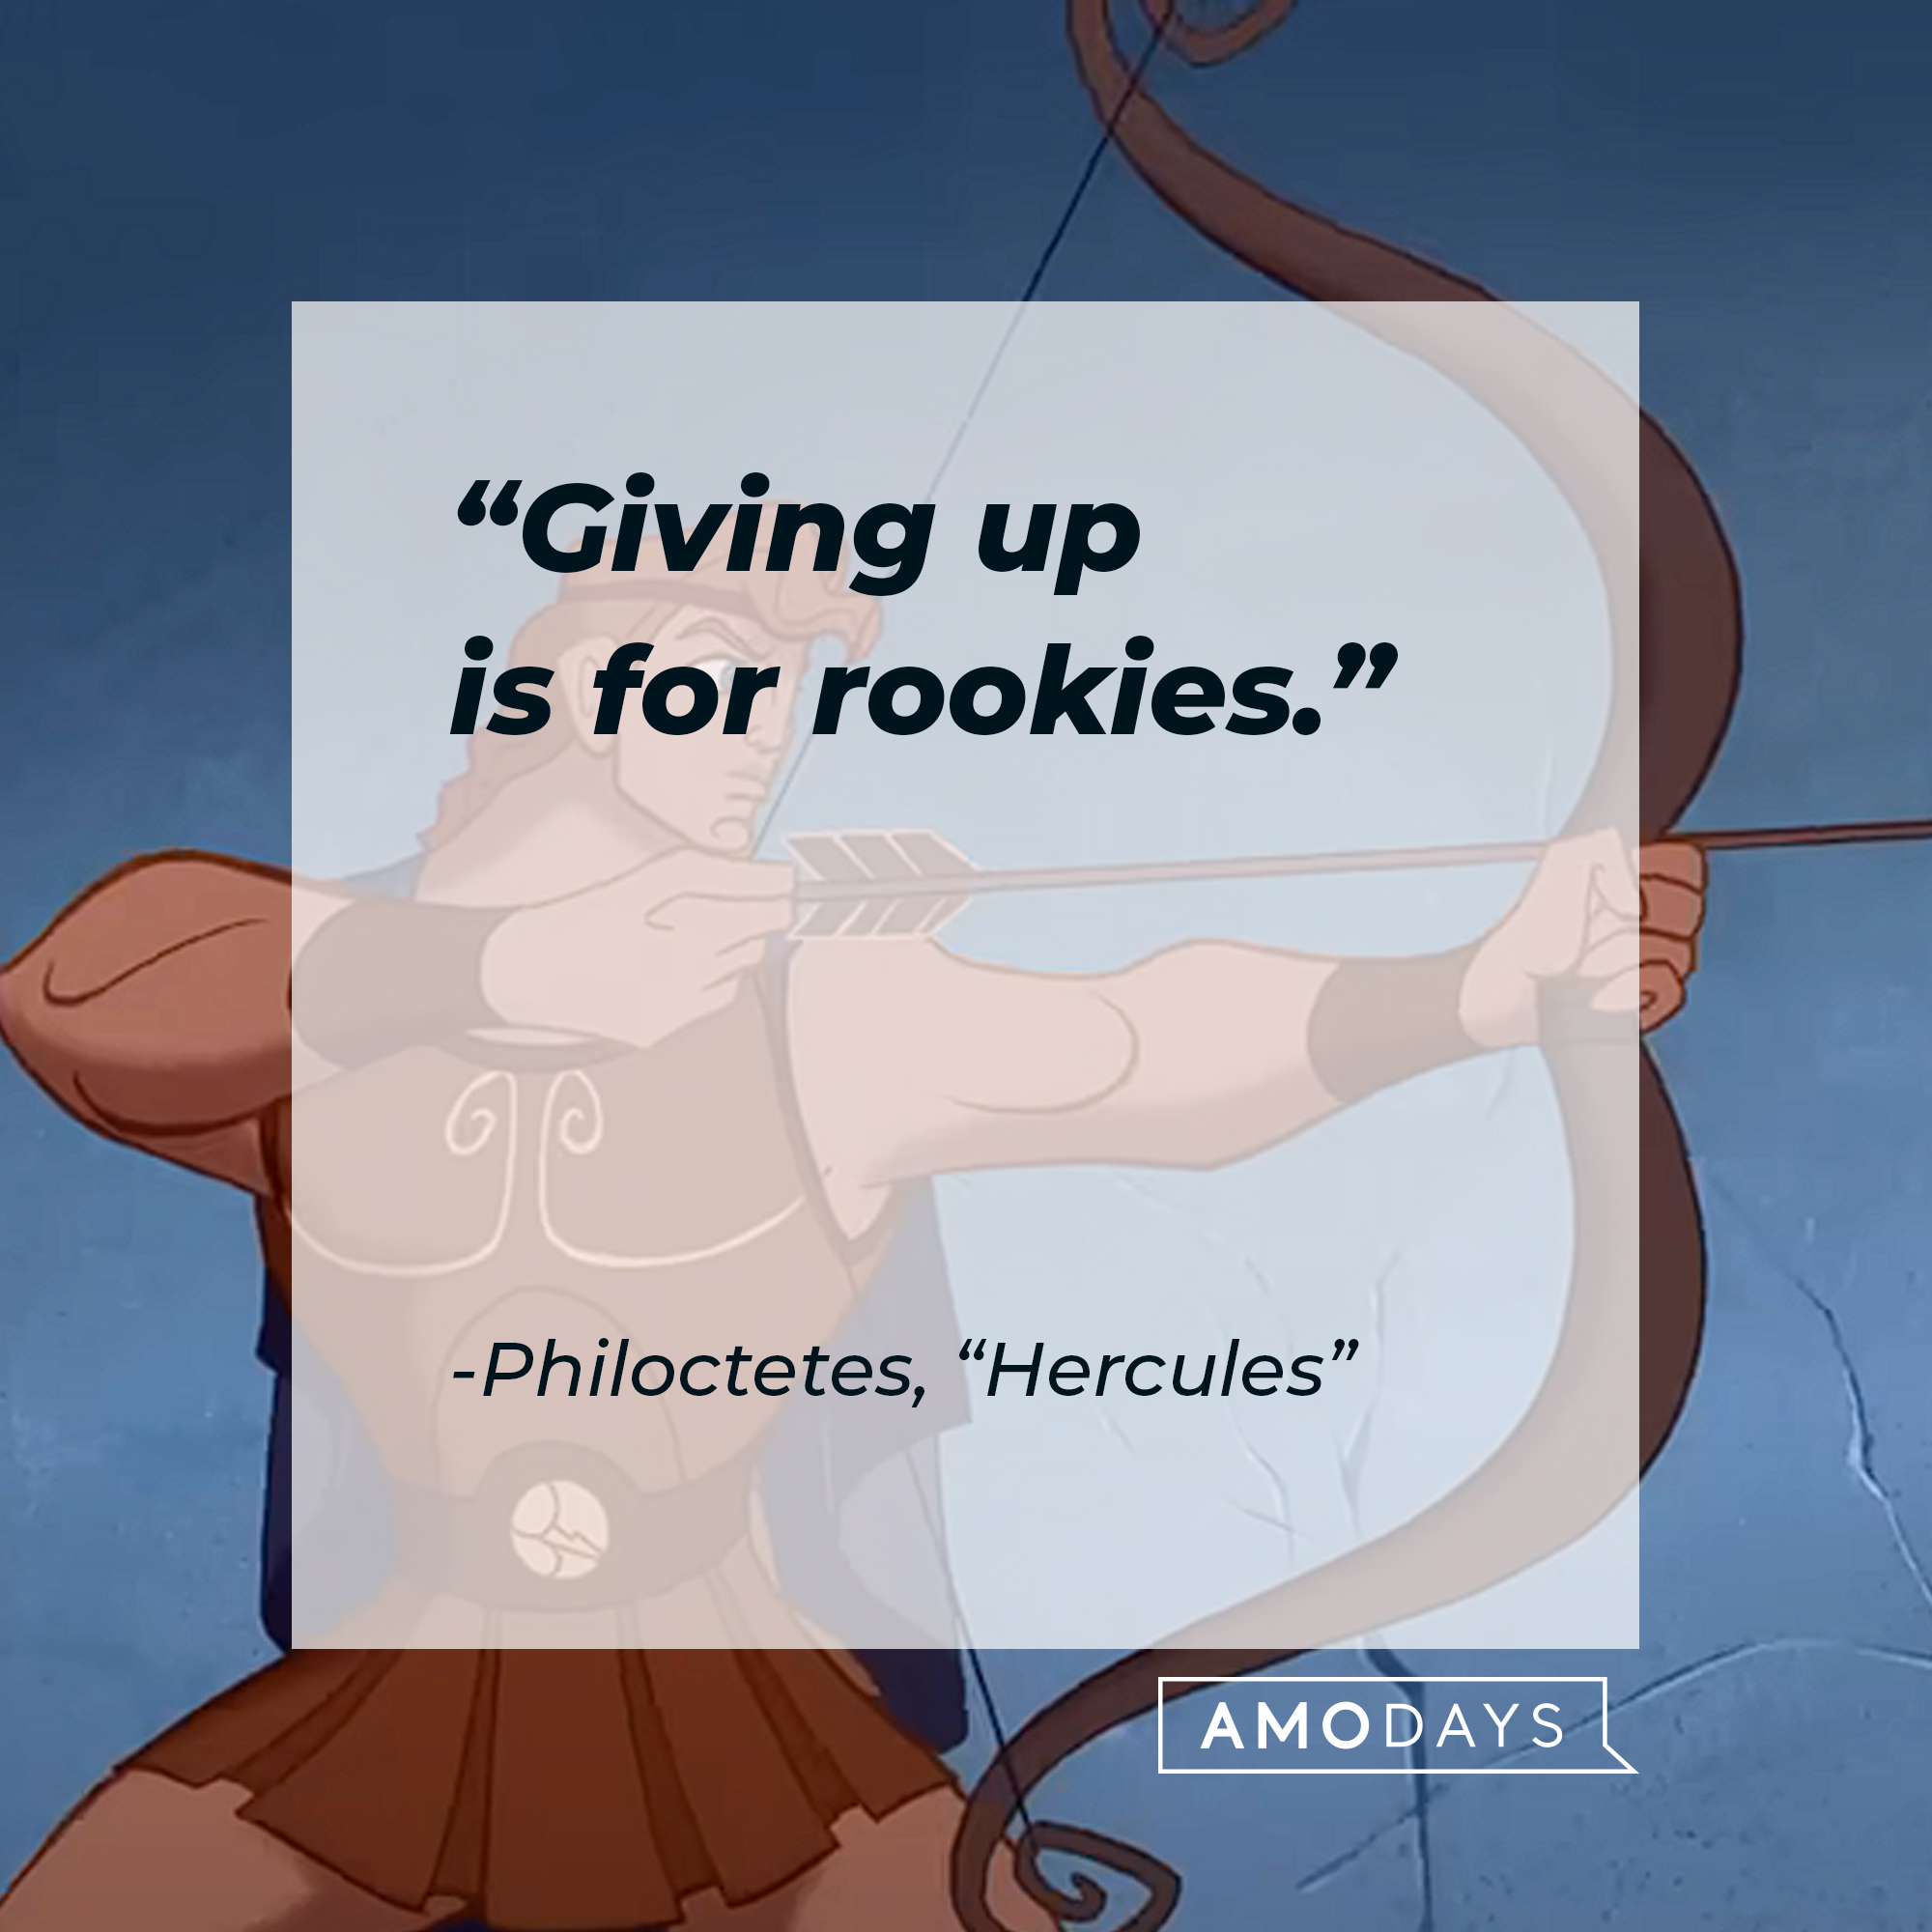 Philoctetes' "Hercules" quote: "Giving up is for rookies." | Source: Youtube.com/Disney